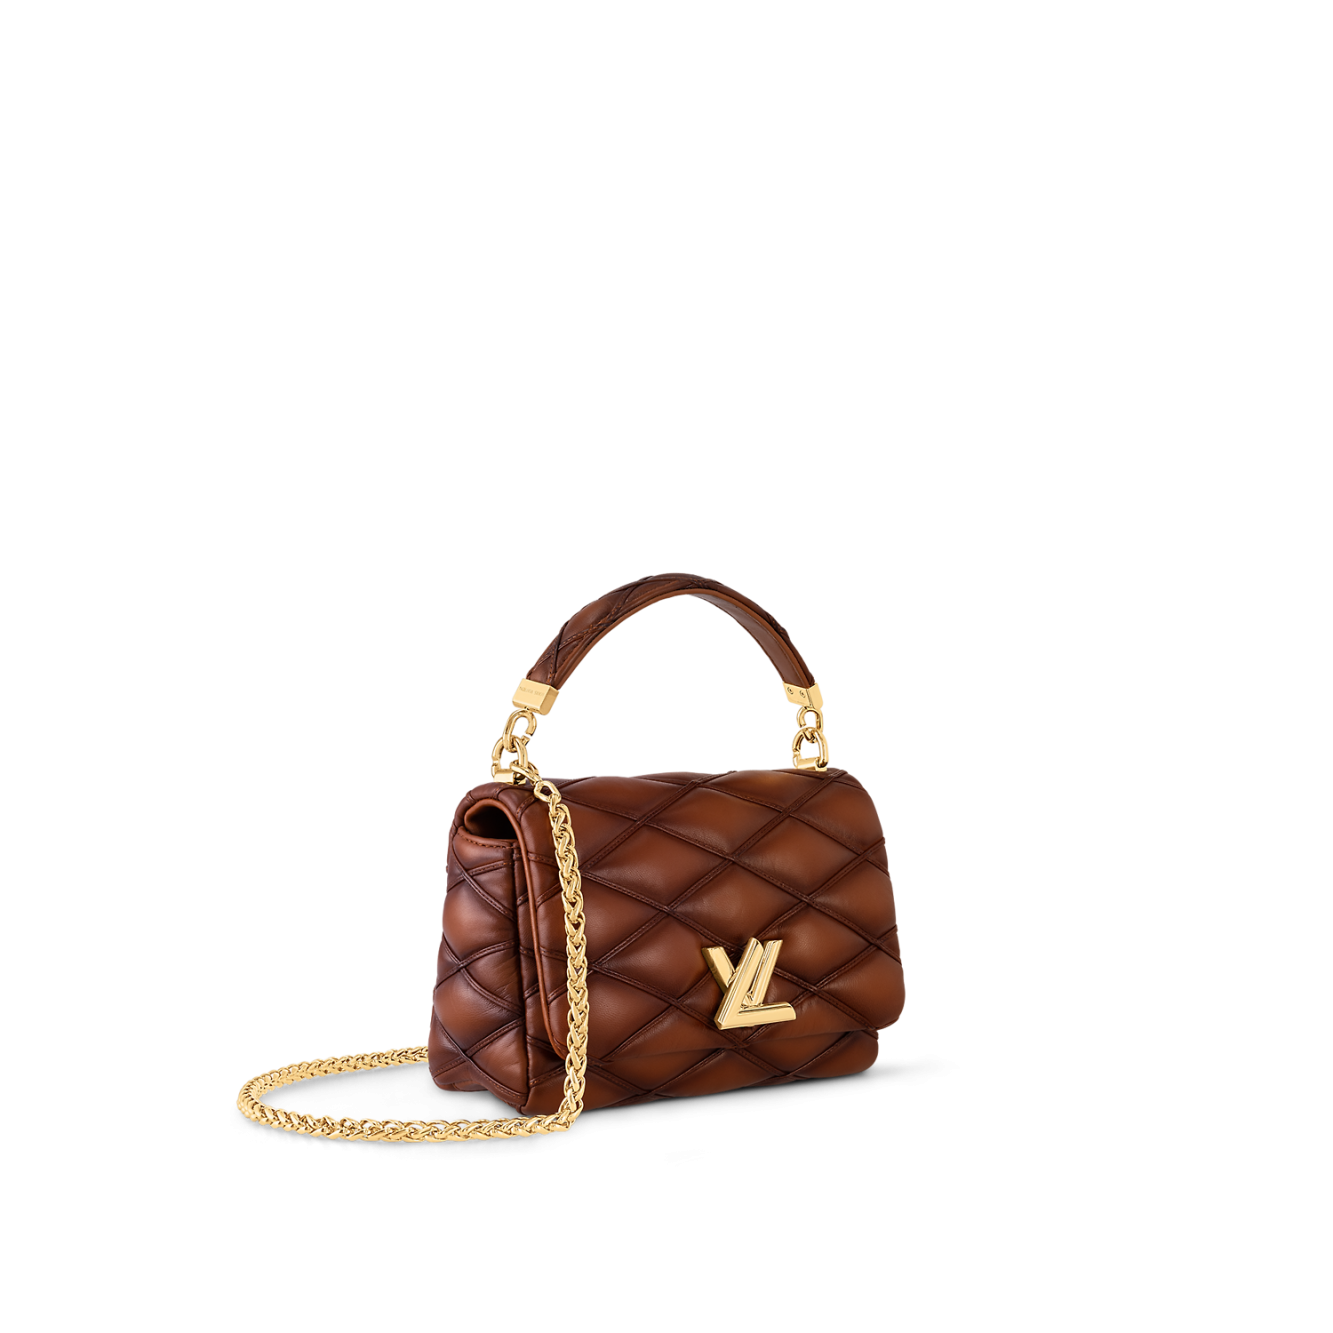 Lambskin Speedy Bandouliere 22 Out + About Today : r/Louisvuitton